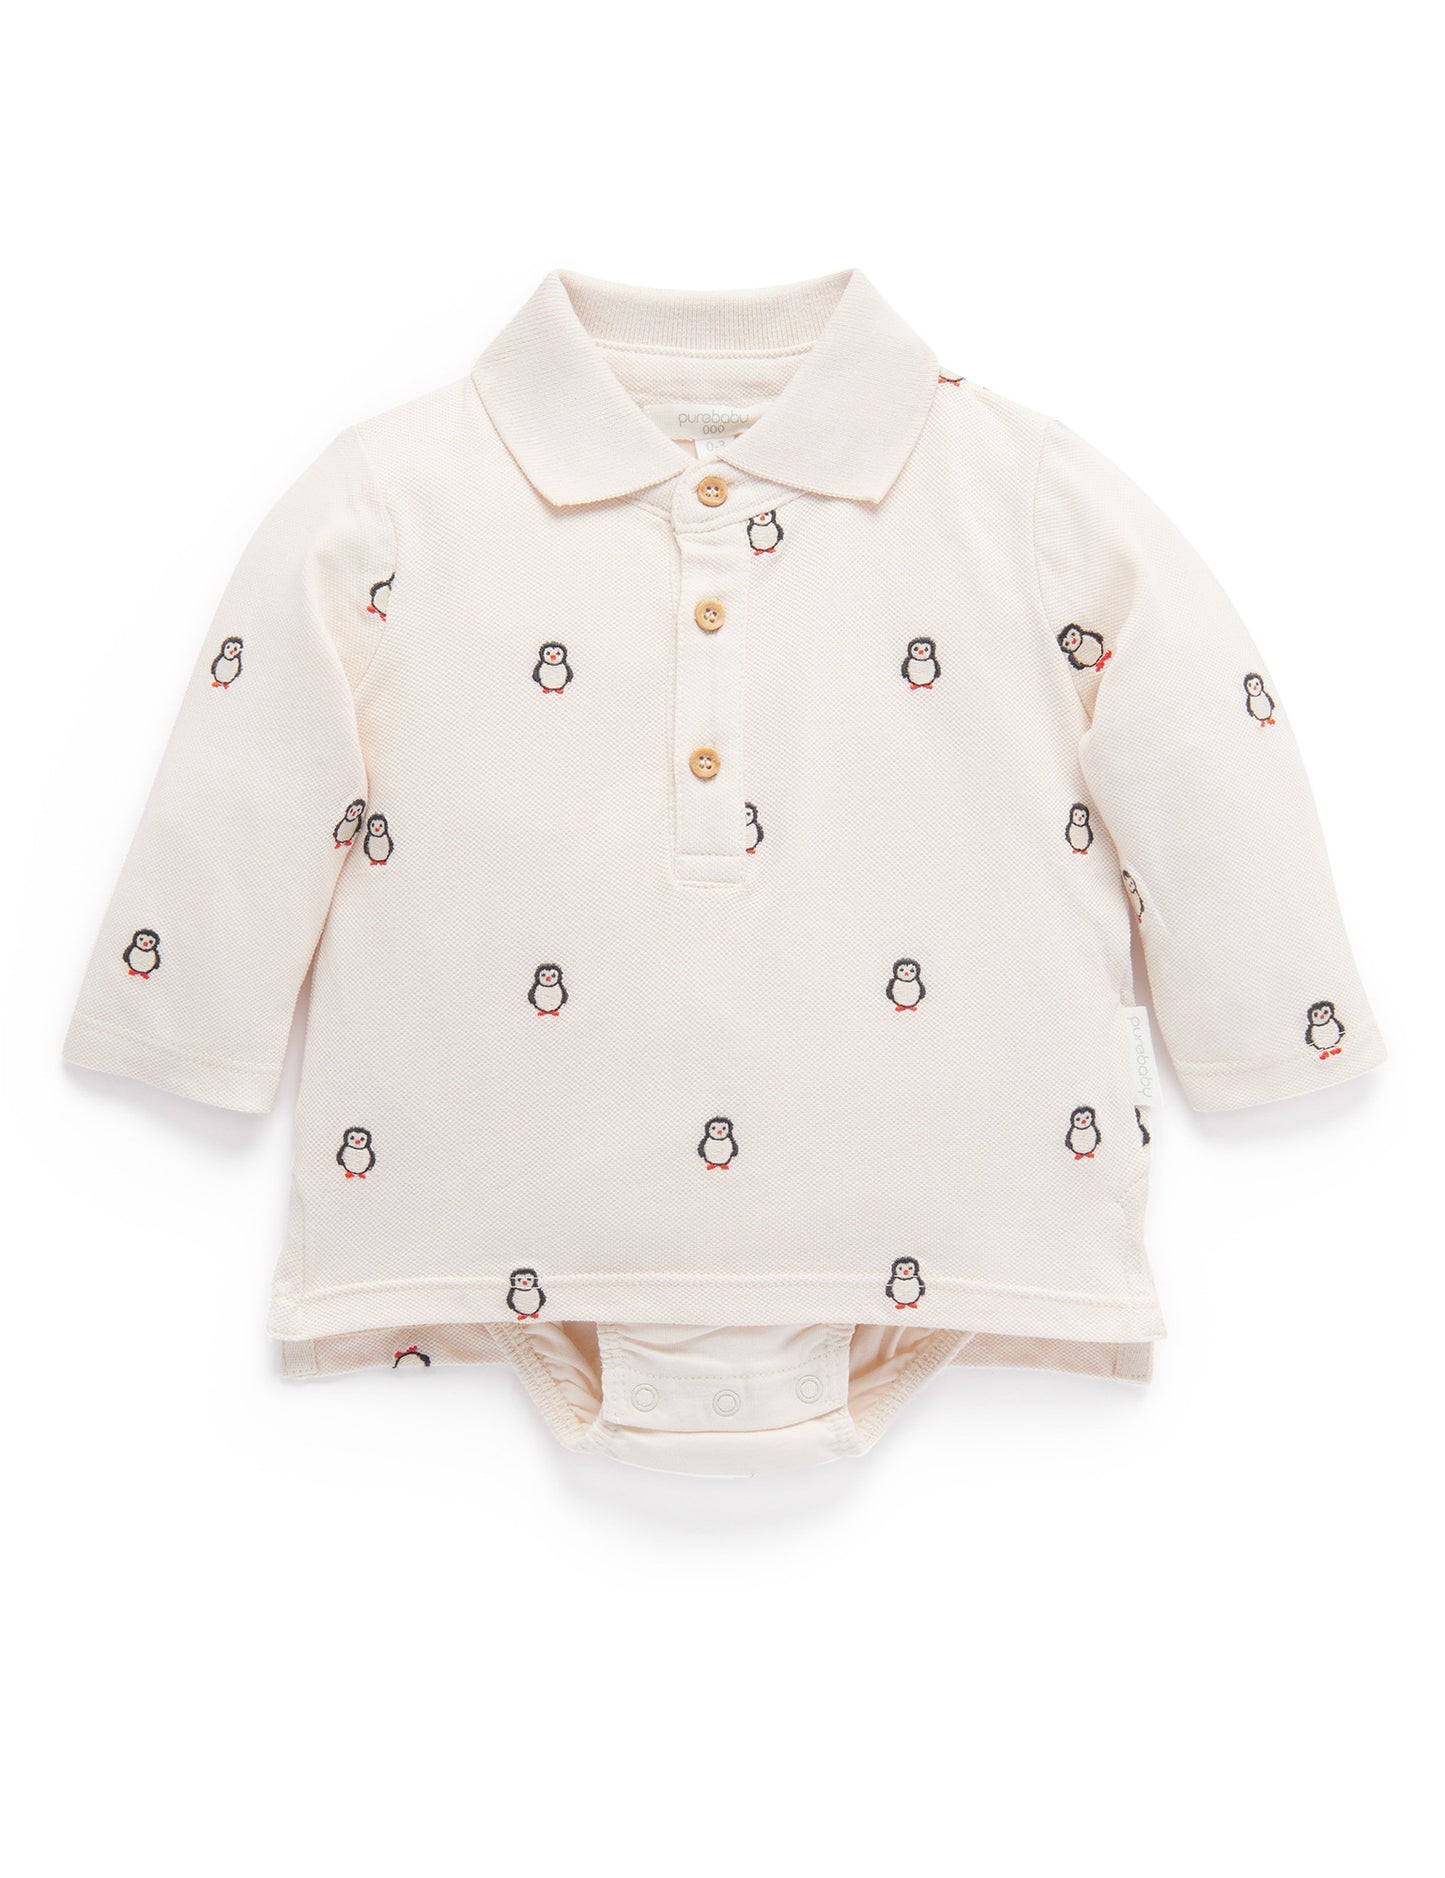 Purebaby　ピュアベビー　EMBROIDERED POLO　PN1056W23